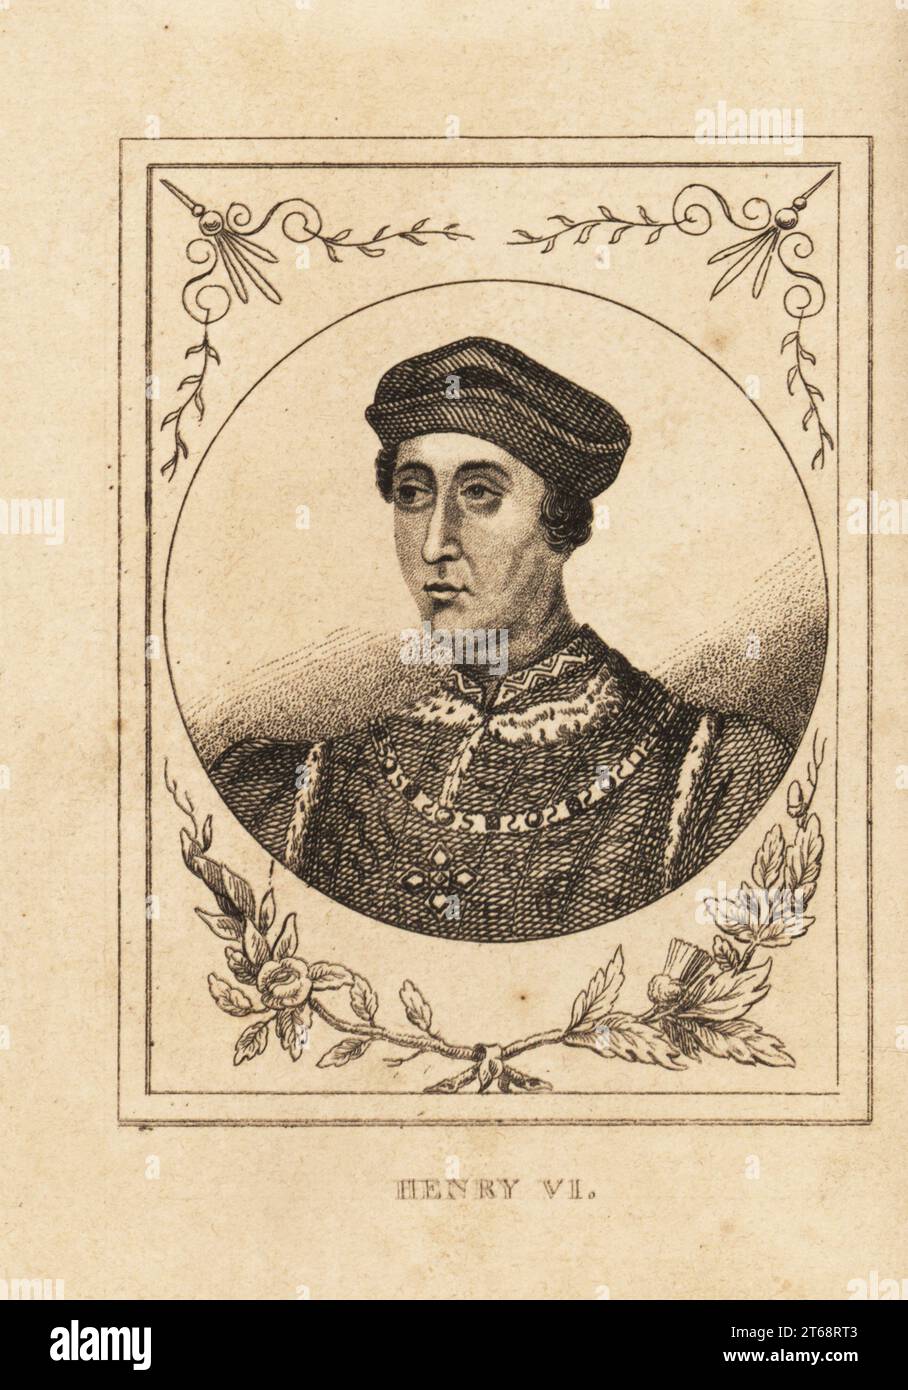 Portrait of King Henry VI of England, 1421-1471. Copperplate engraving from M. A. Jones History of England from Julius Caesar to George IV, G. Virtue, 26 Ivy Lane, London, 1836. Stock Photo